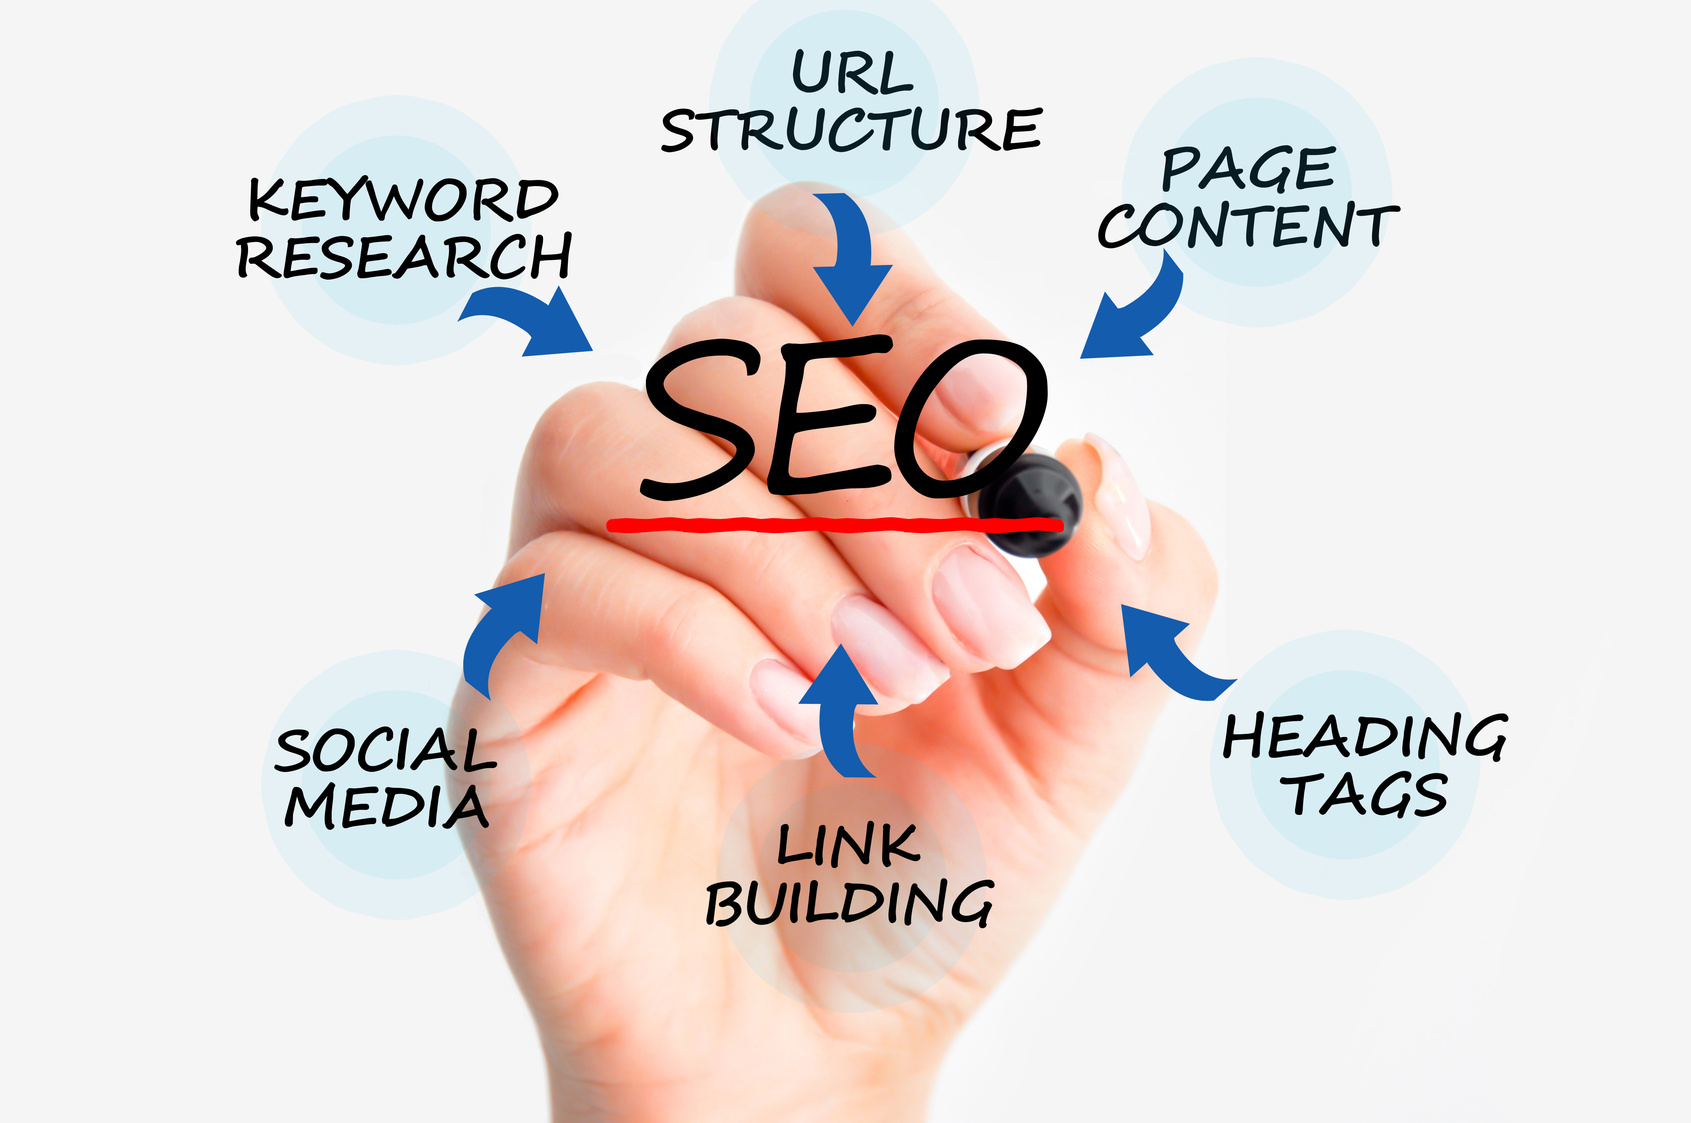 search engine optimization is not optional